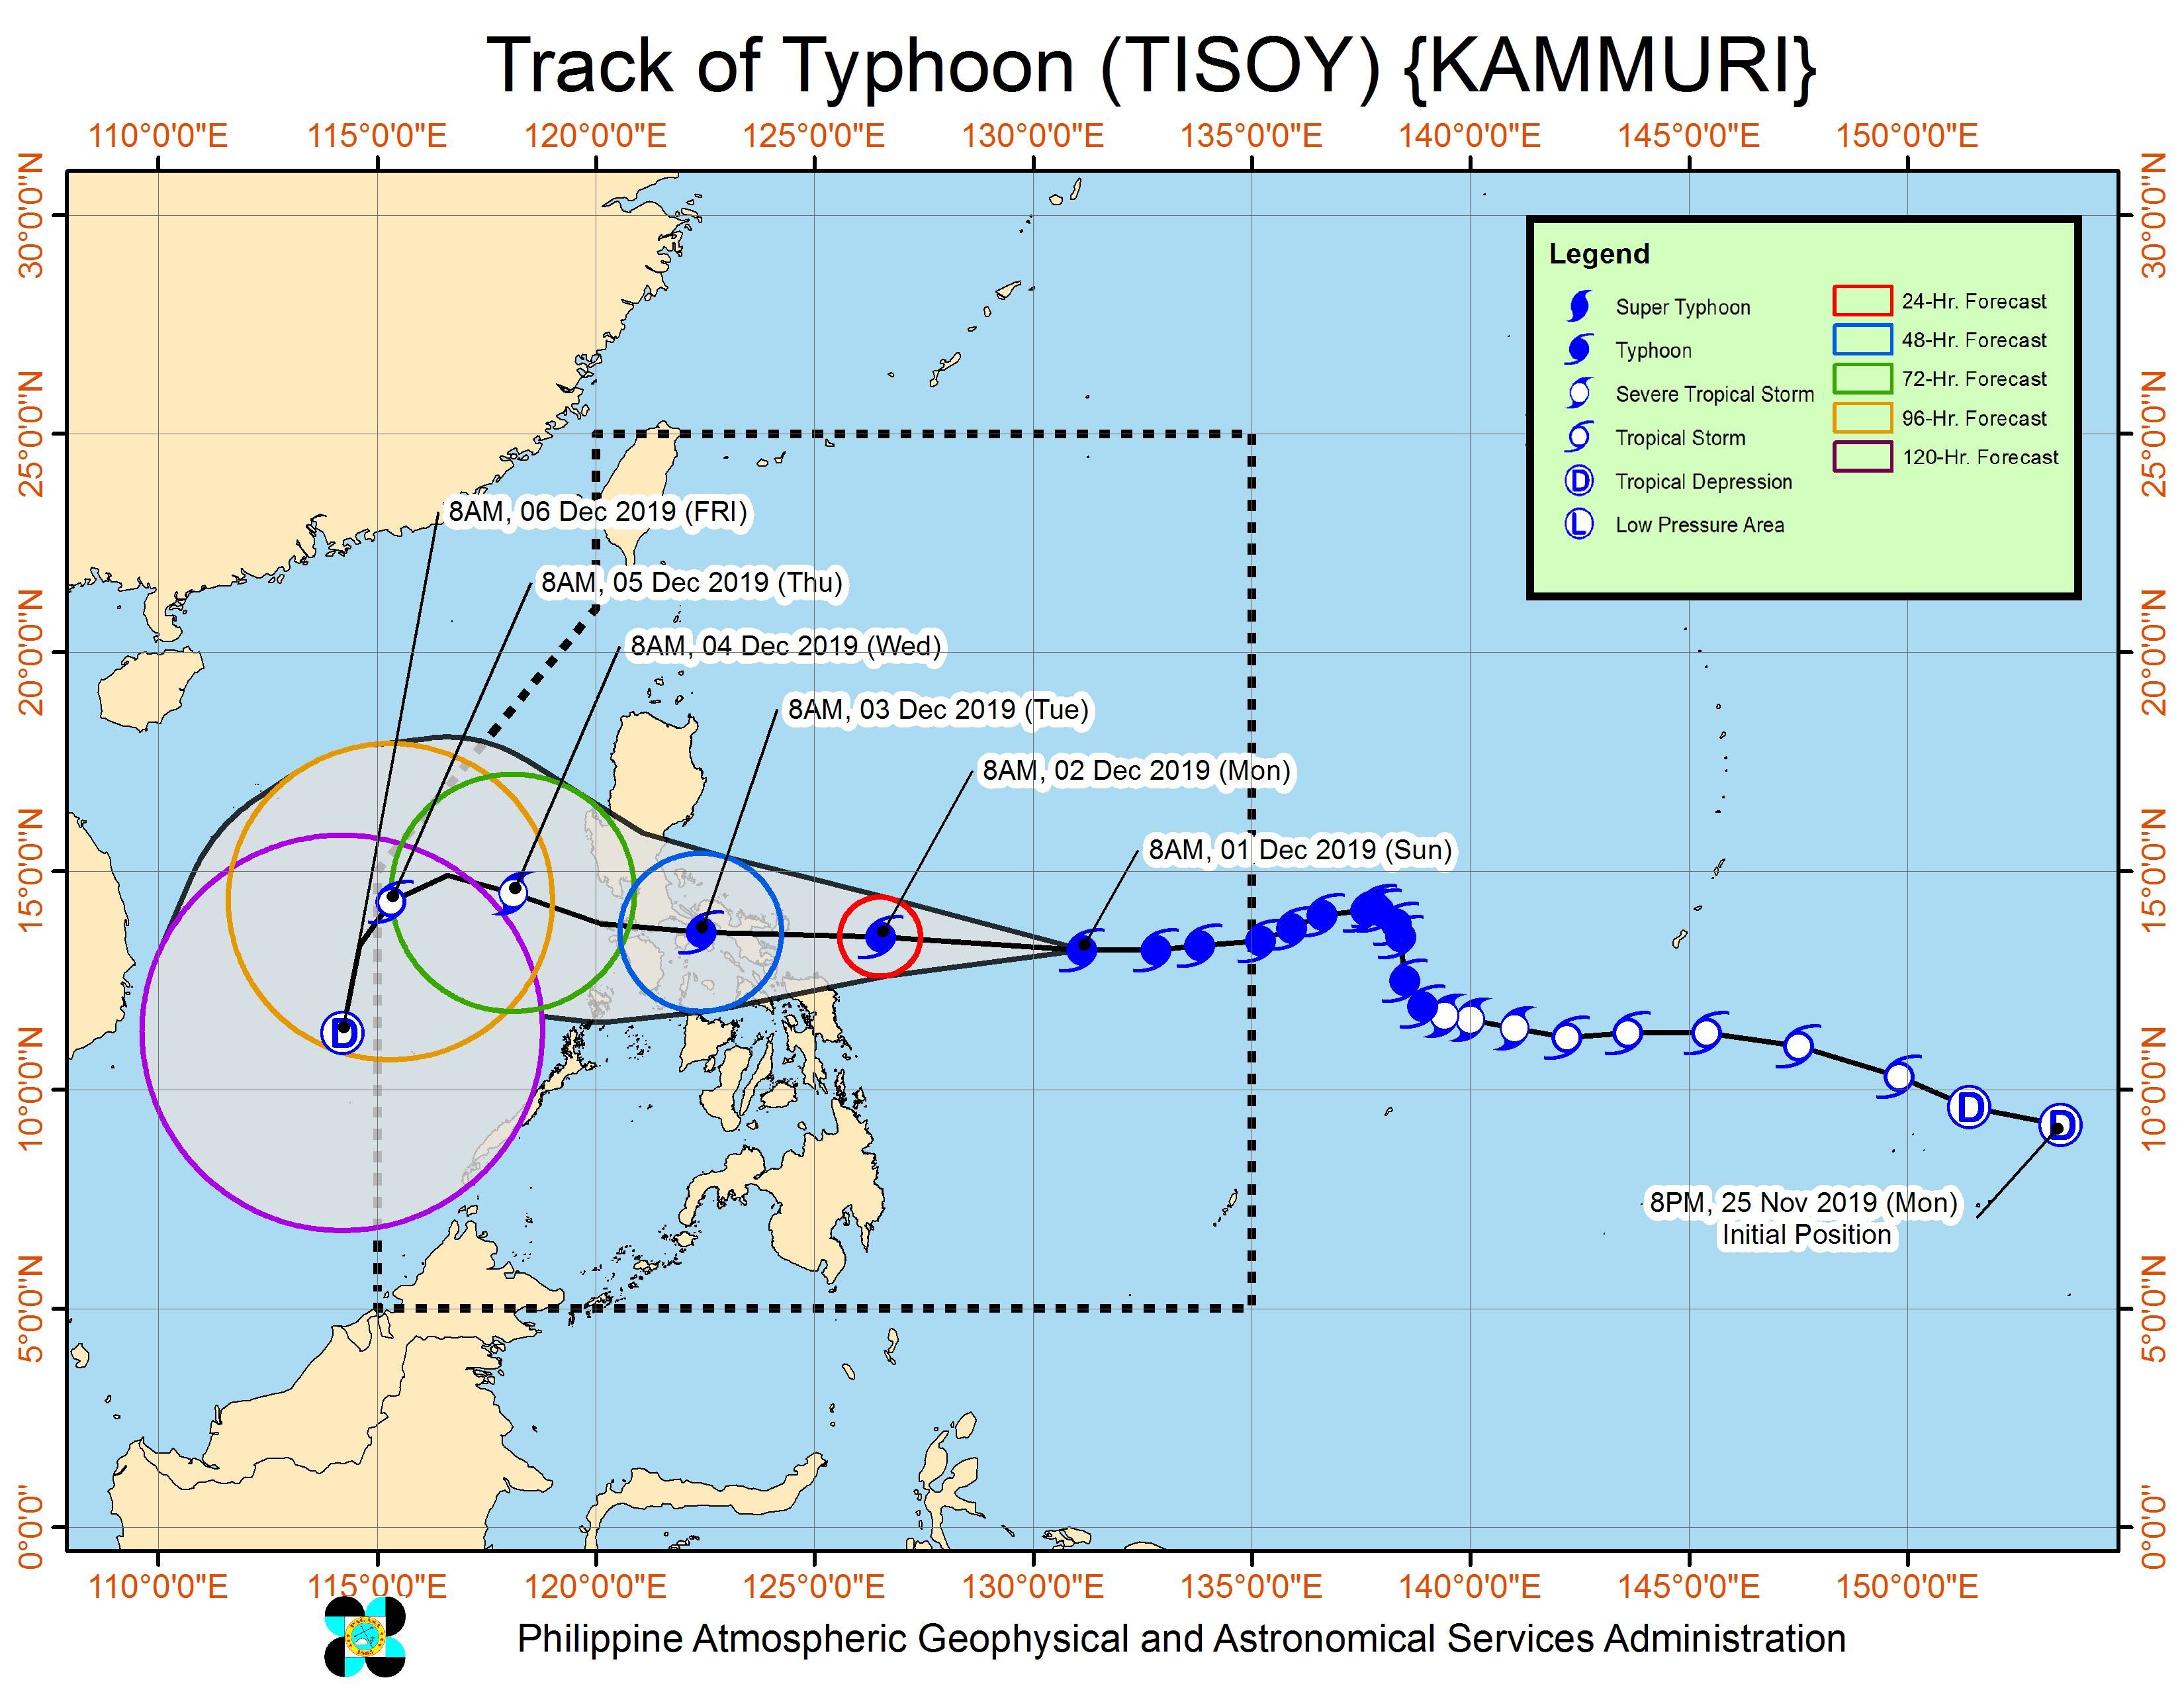 Forecast track of Typhoon Tisoy (Kammuri) as of December 1, 2019, 11 am. Image from PAGASA 